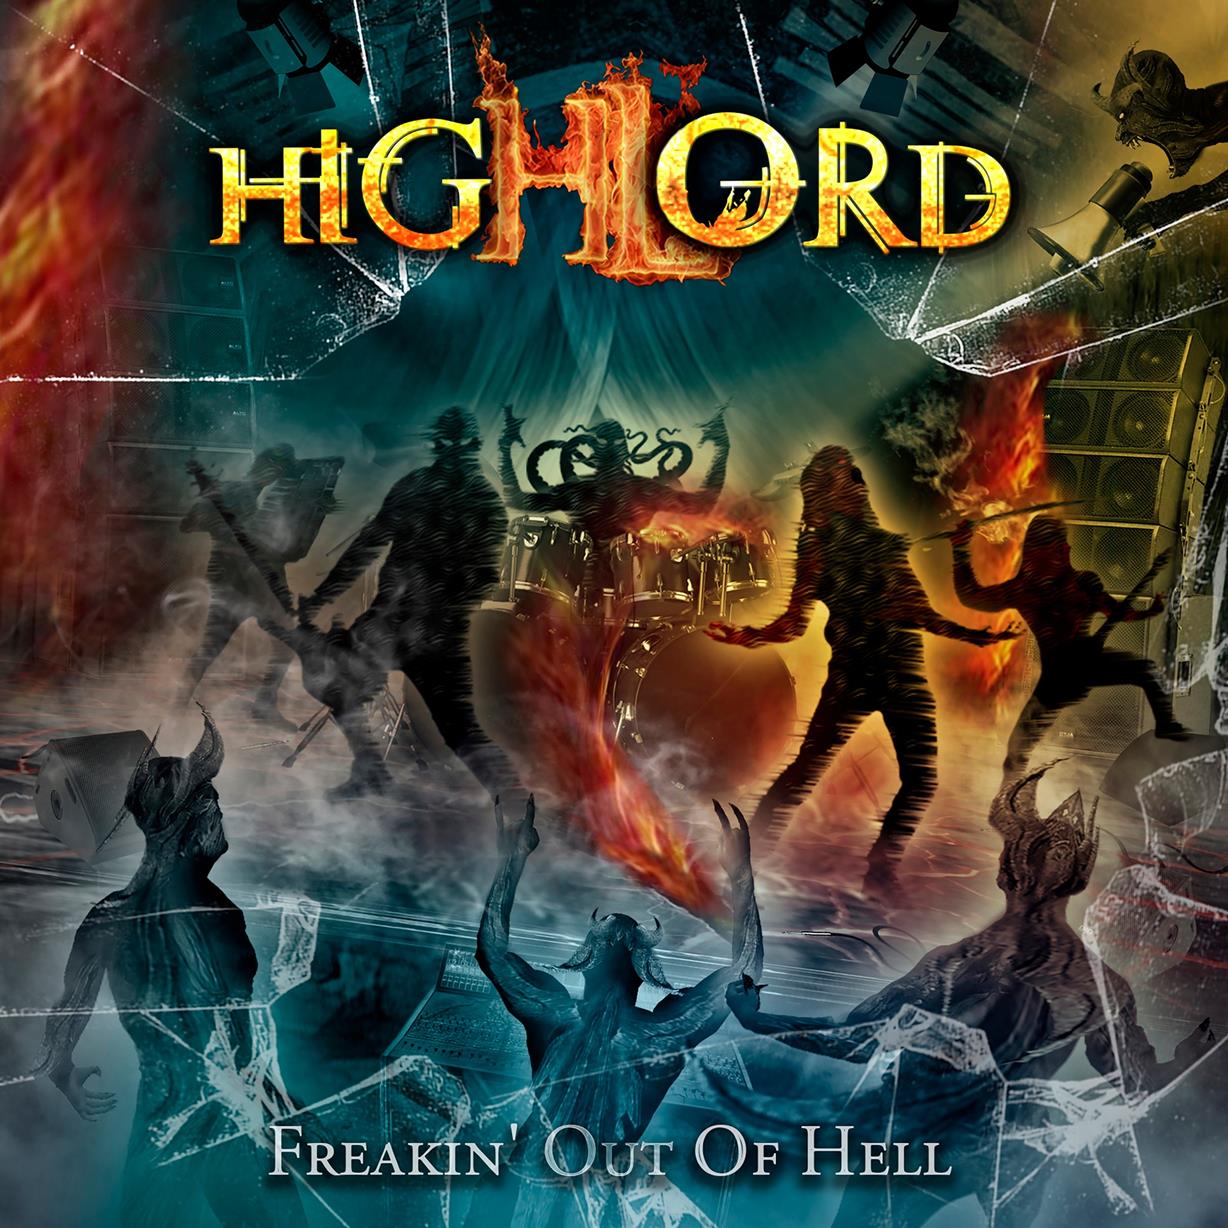 HIGHLORD / Freakin' Out of Hell